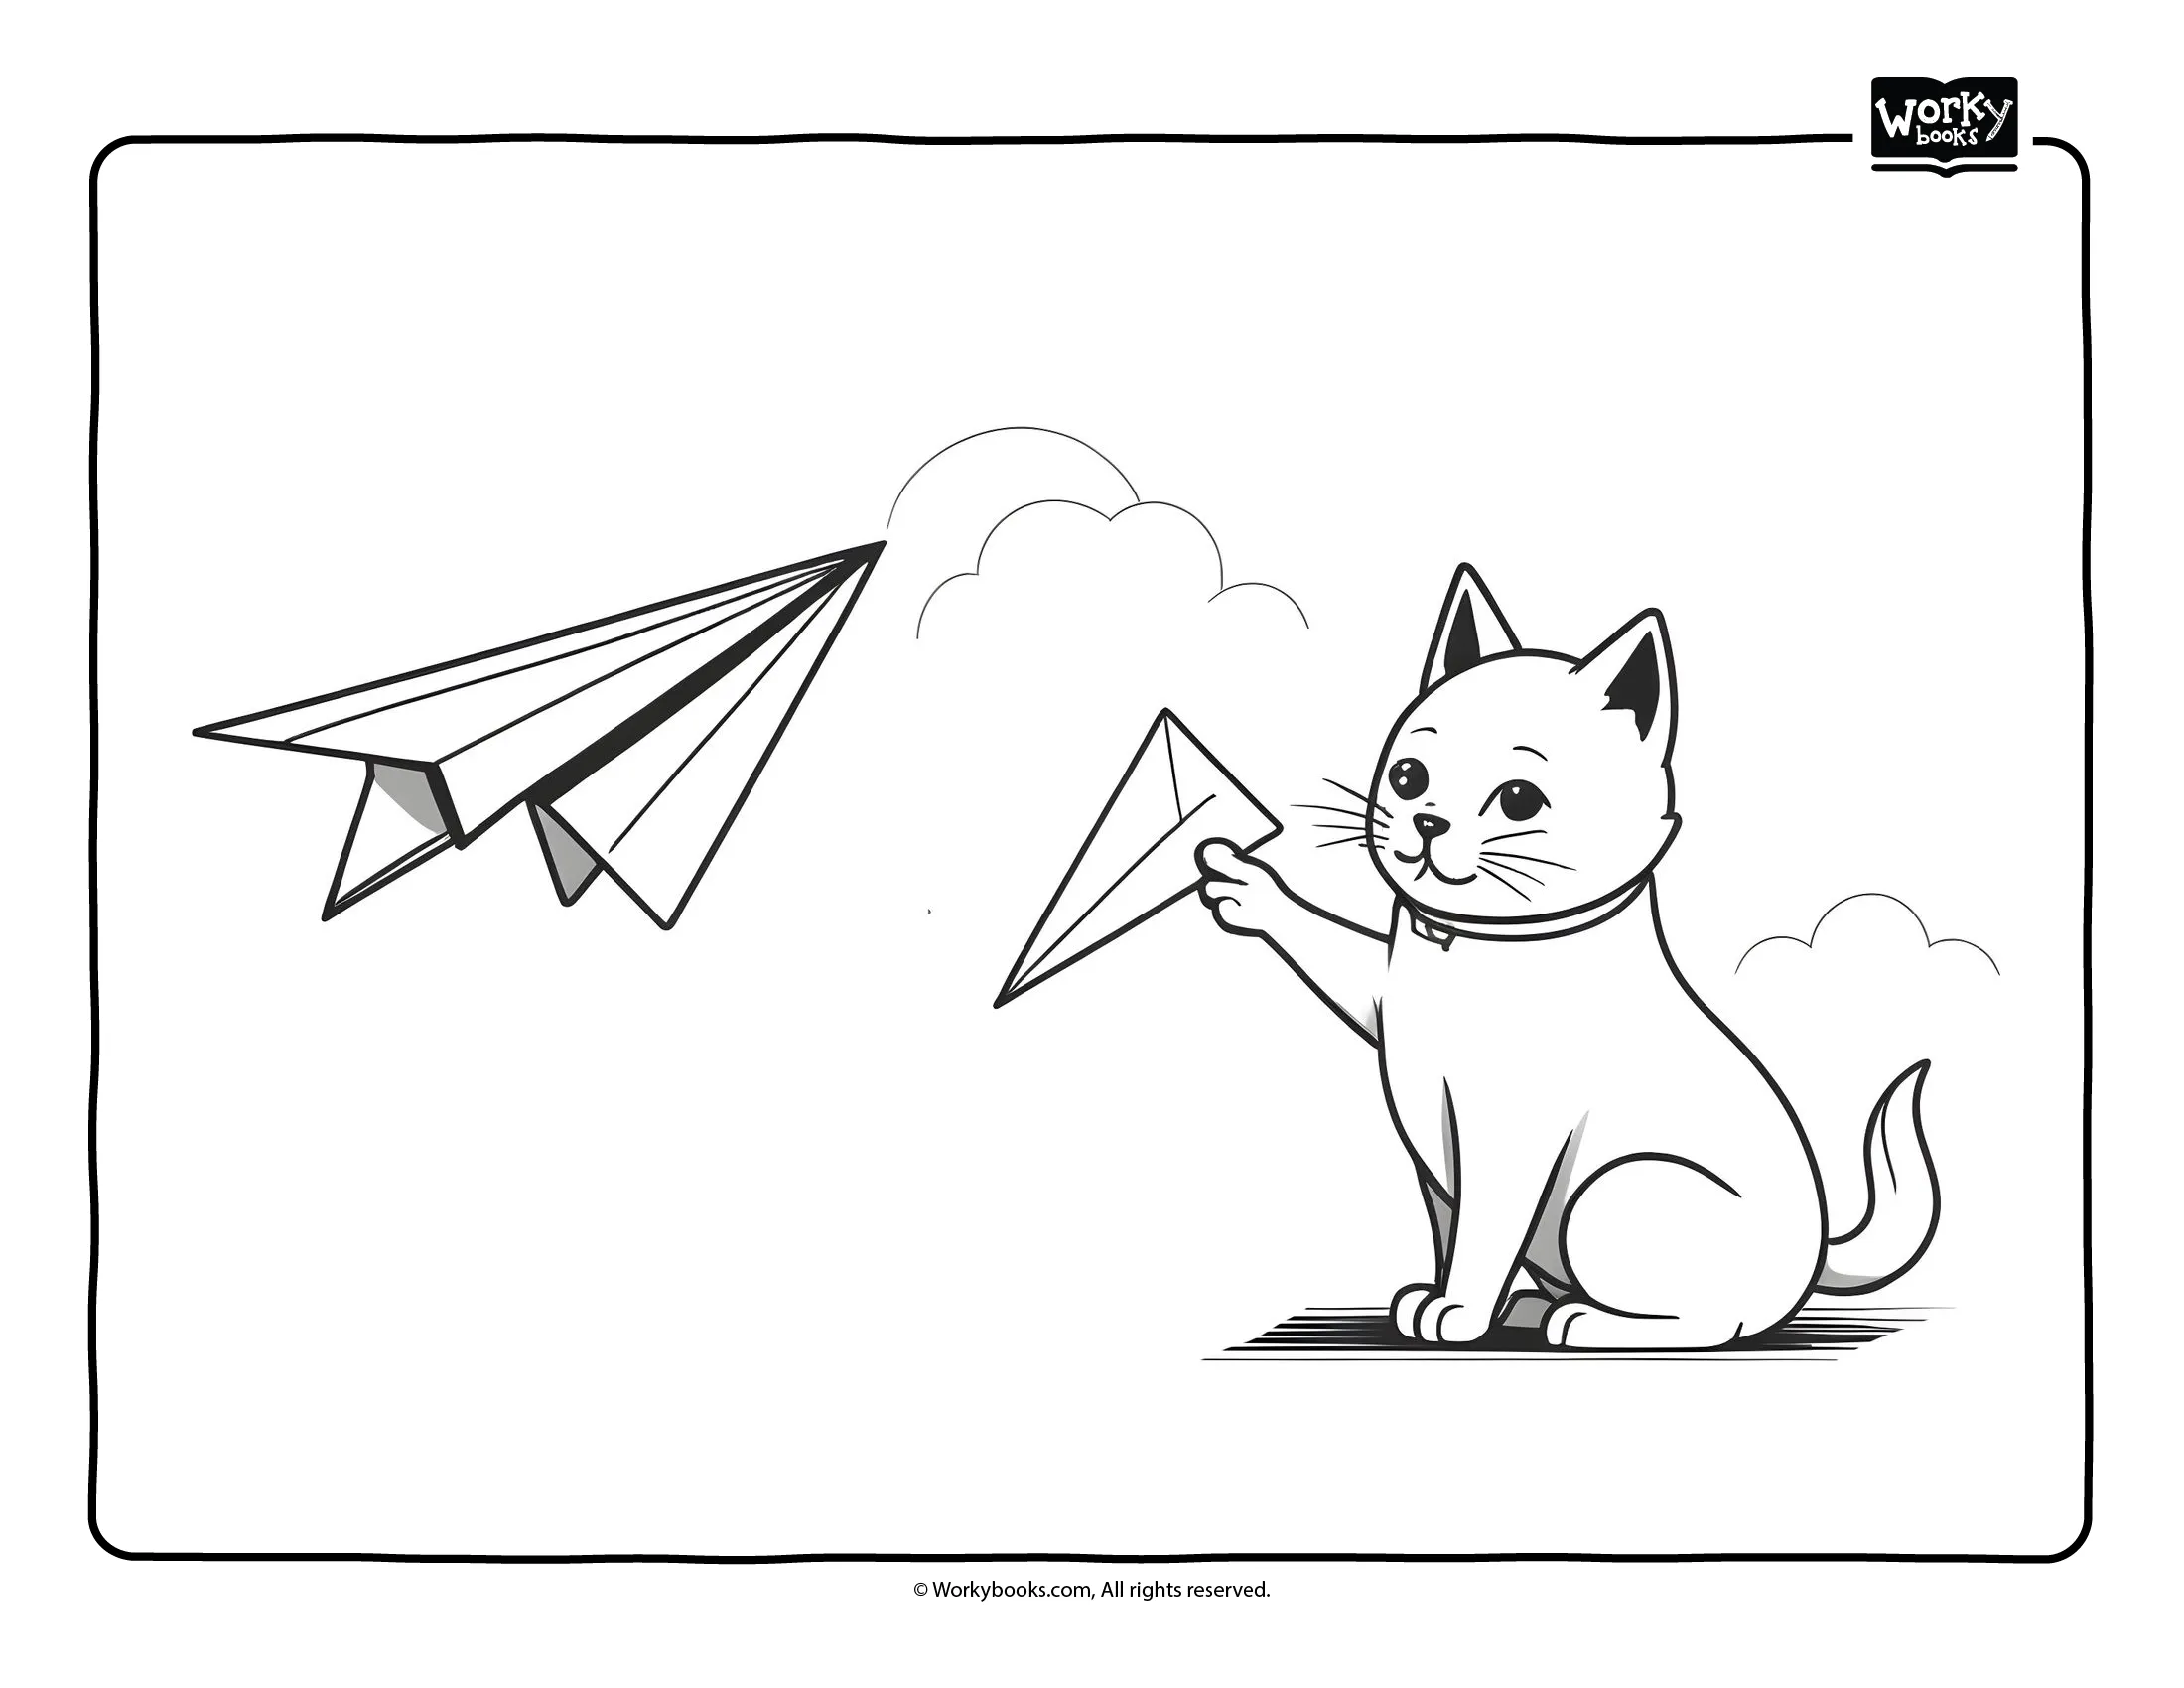 cat and paper planes
